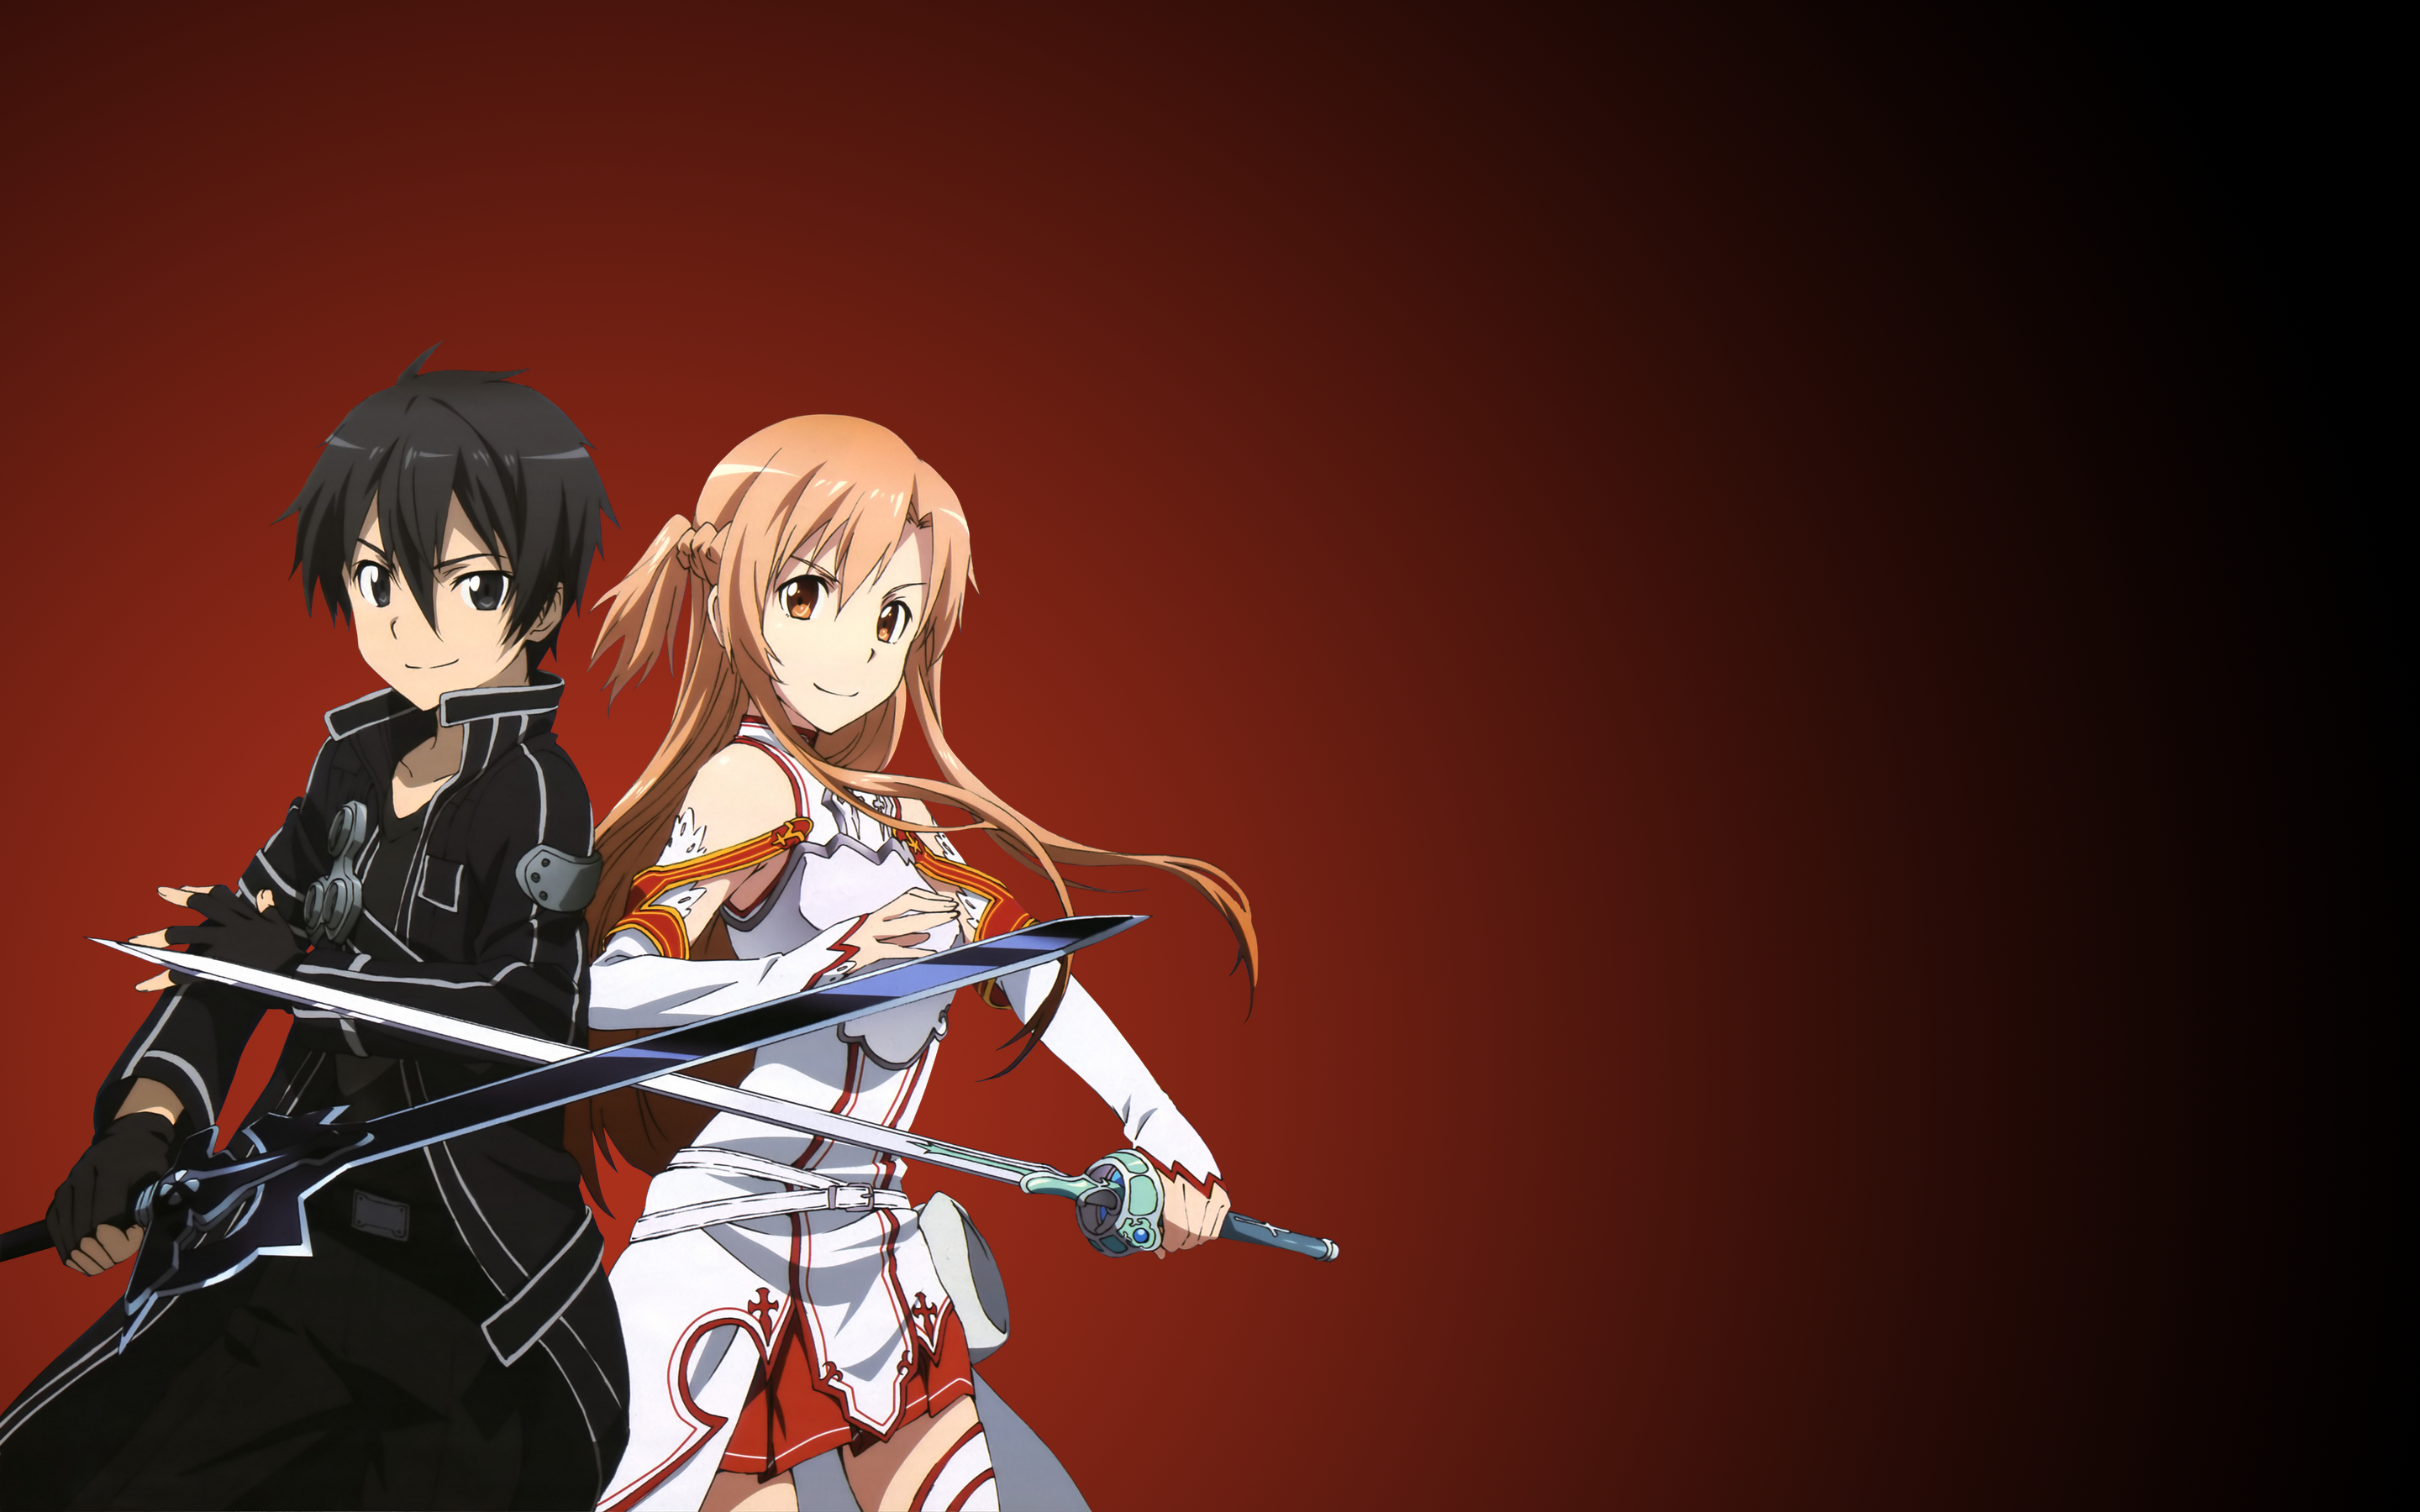 Kirito (Sword Art Online) HD Wallpapers and Backgrounds. 